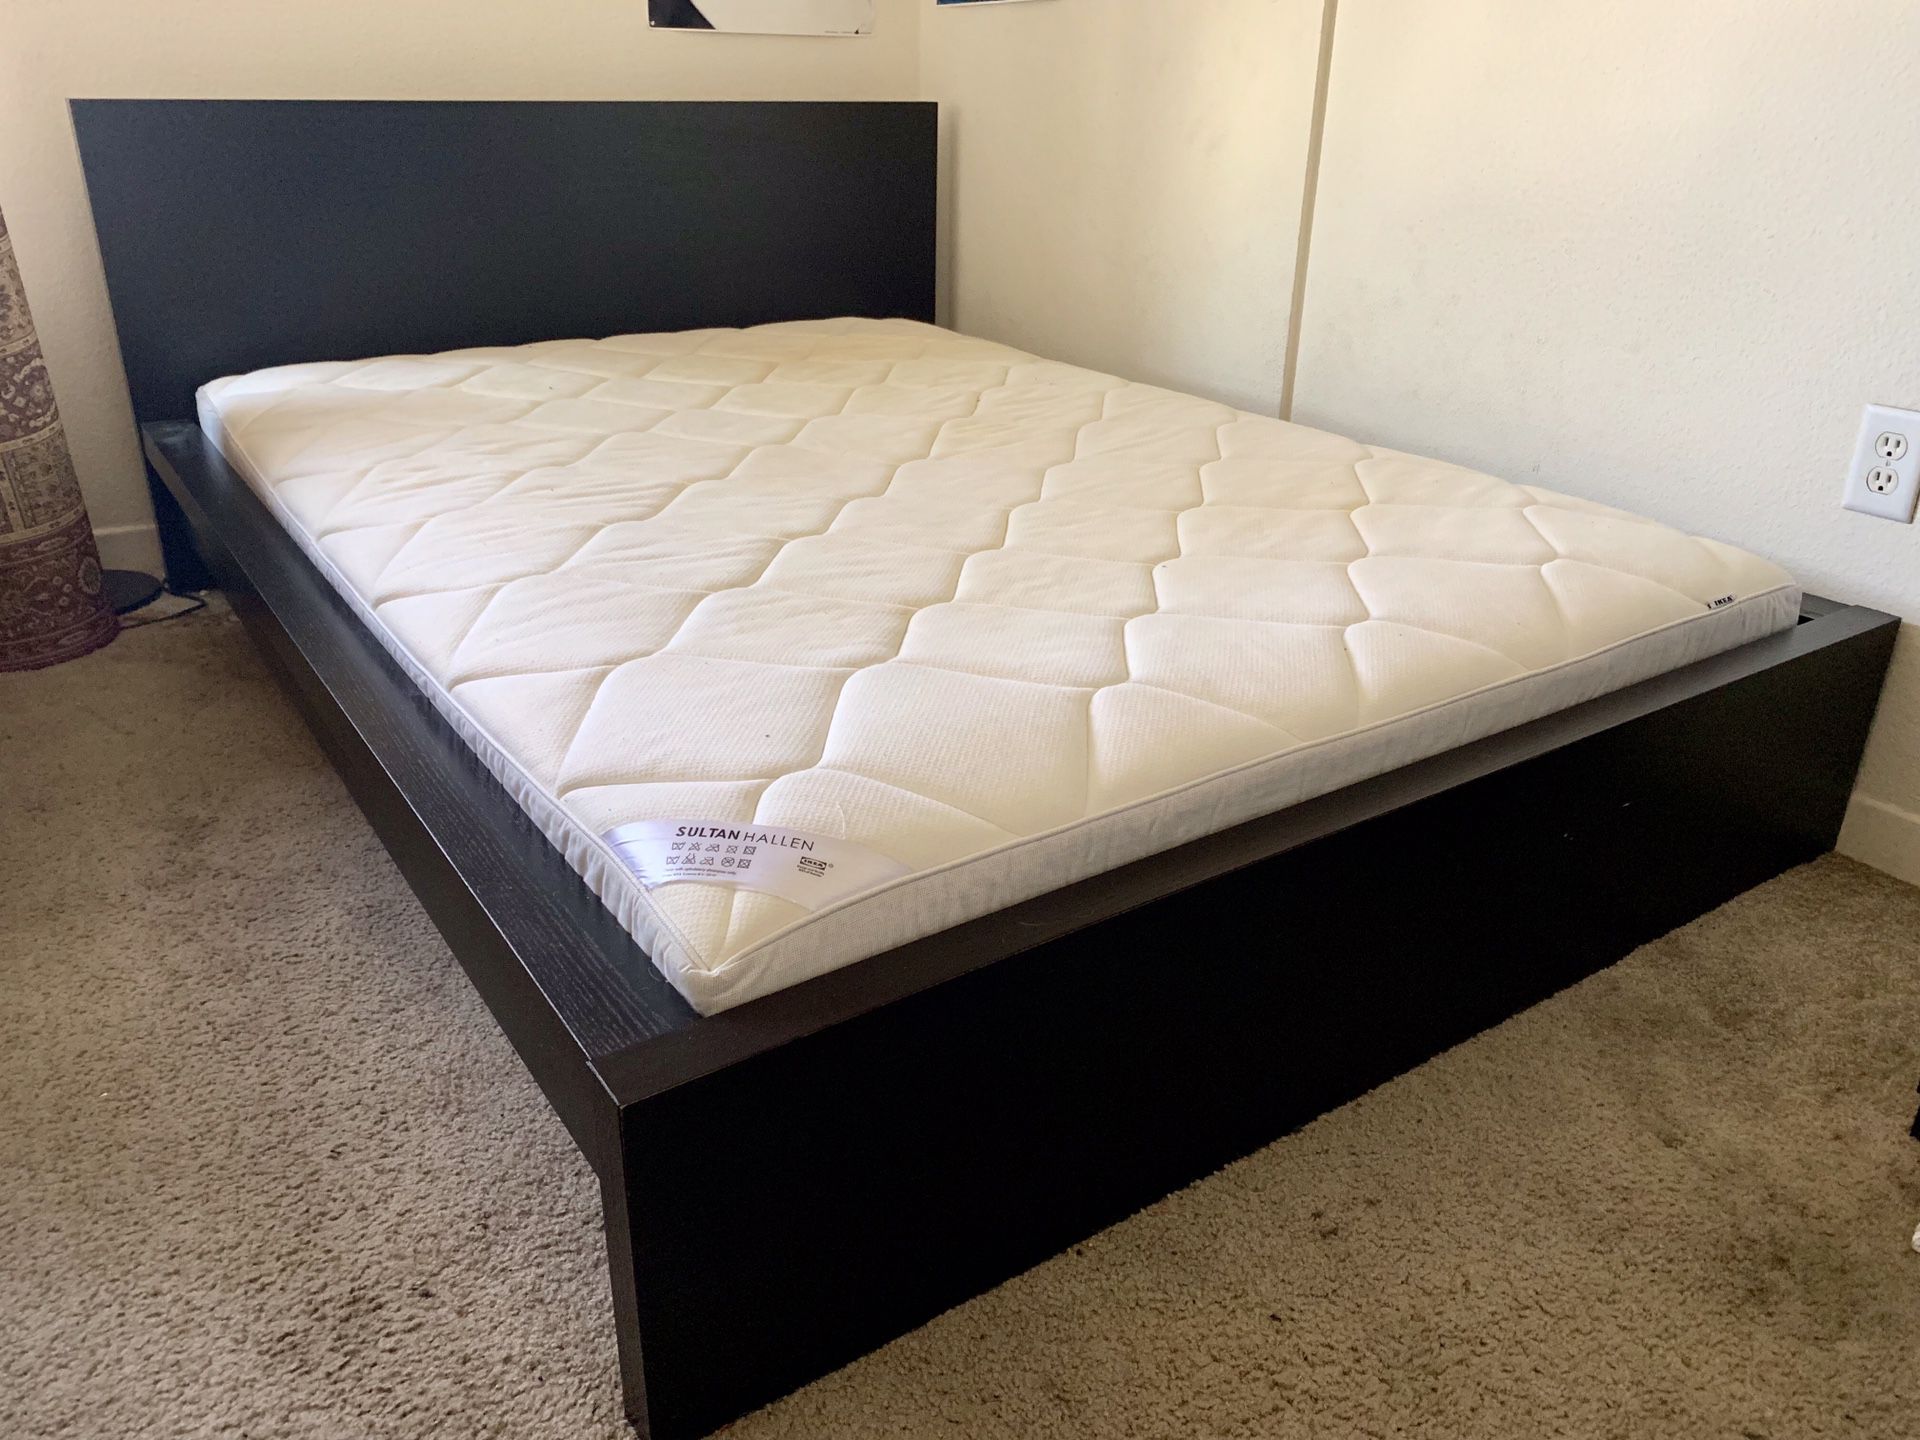 Full Mattress & Frame - (Perfect Condition) 1 month old!